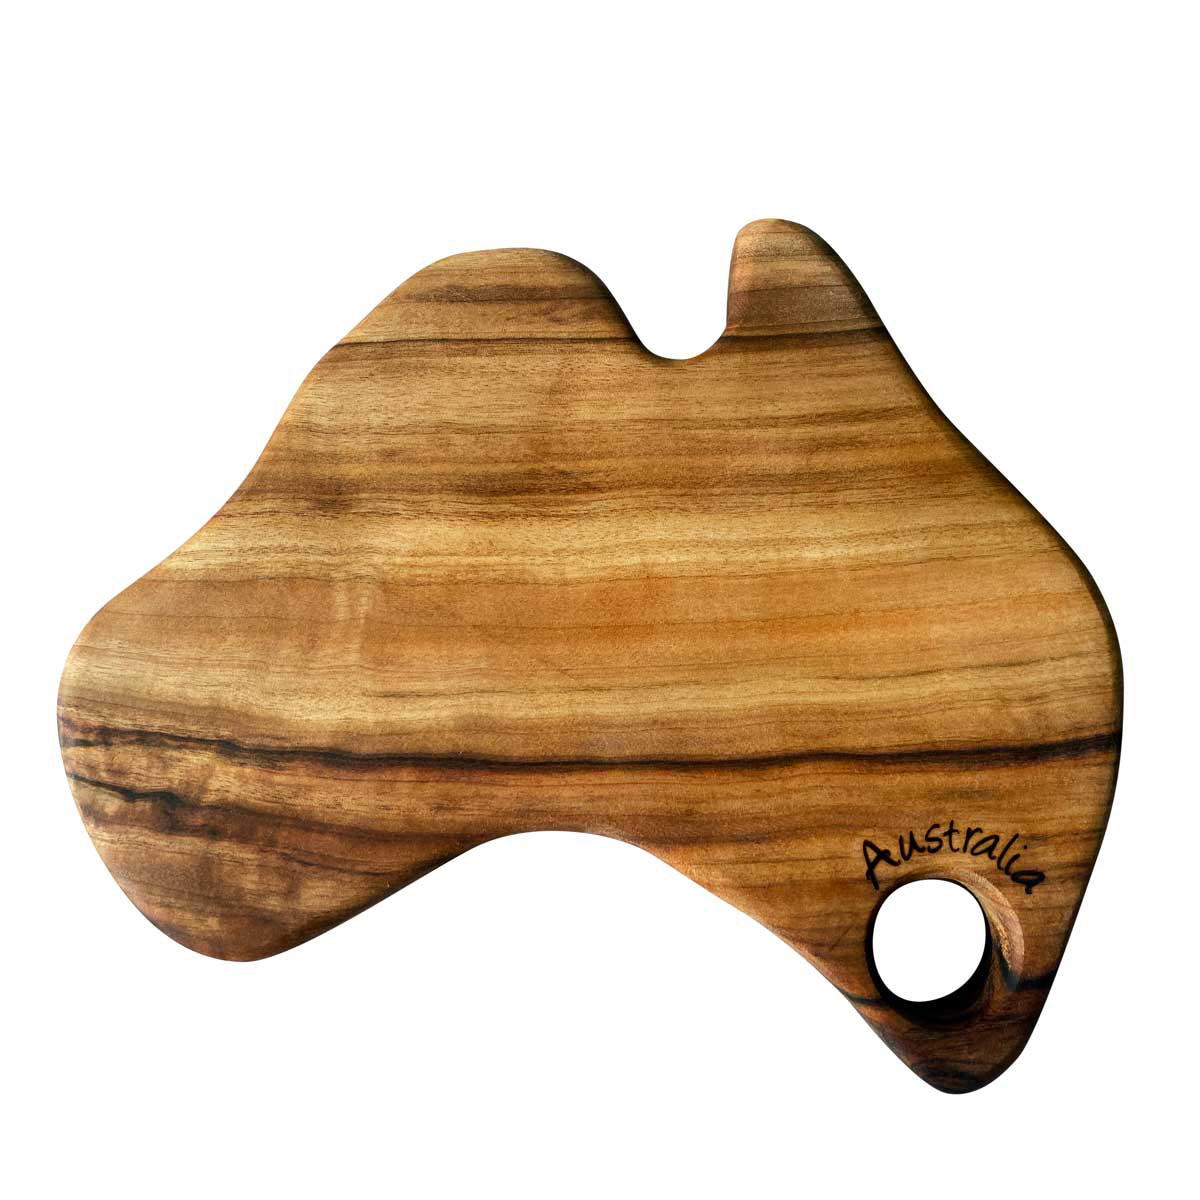 A small handcrafted wooden cheese board carved in the shape of Australia, made with camphor laurel timber by Nature's Boards.